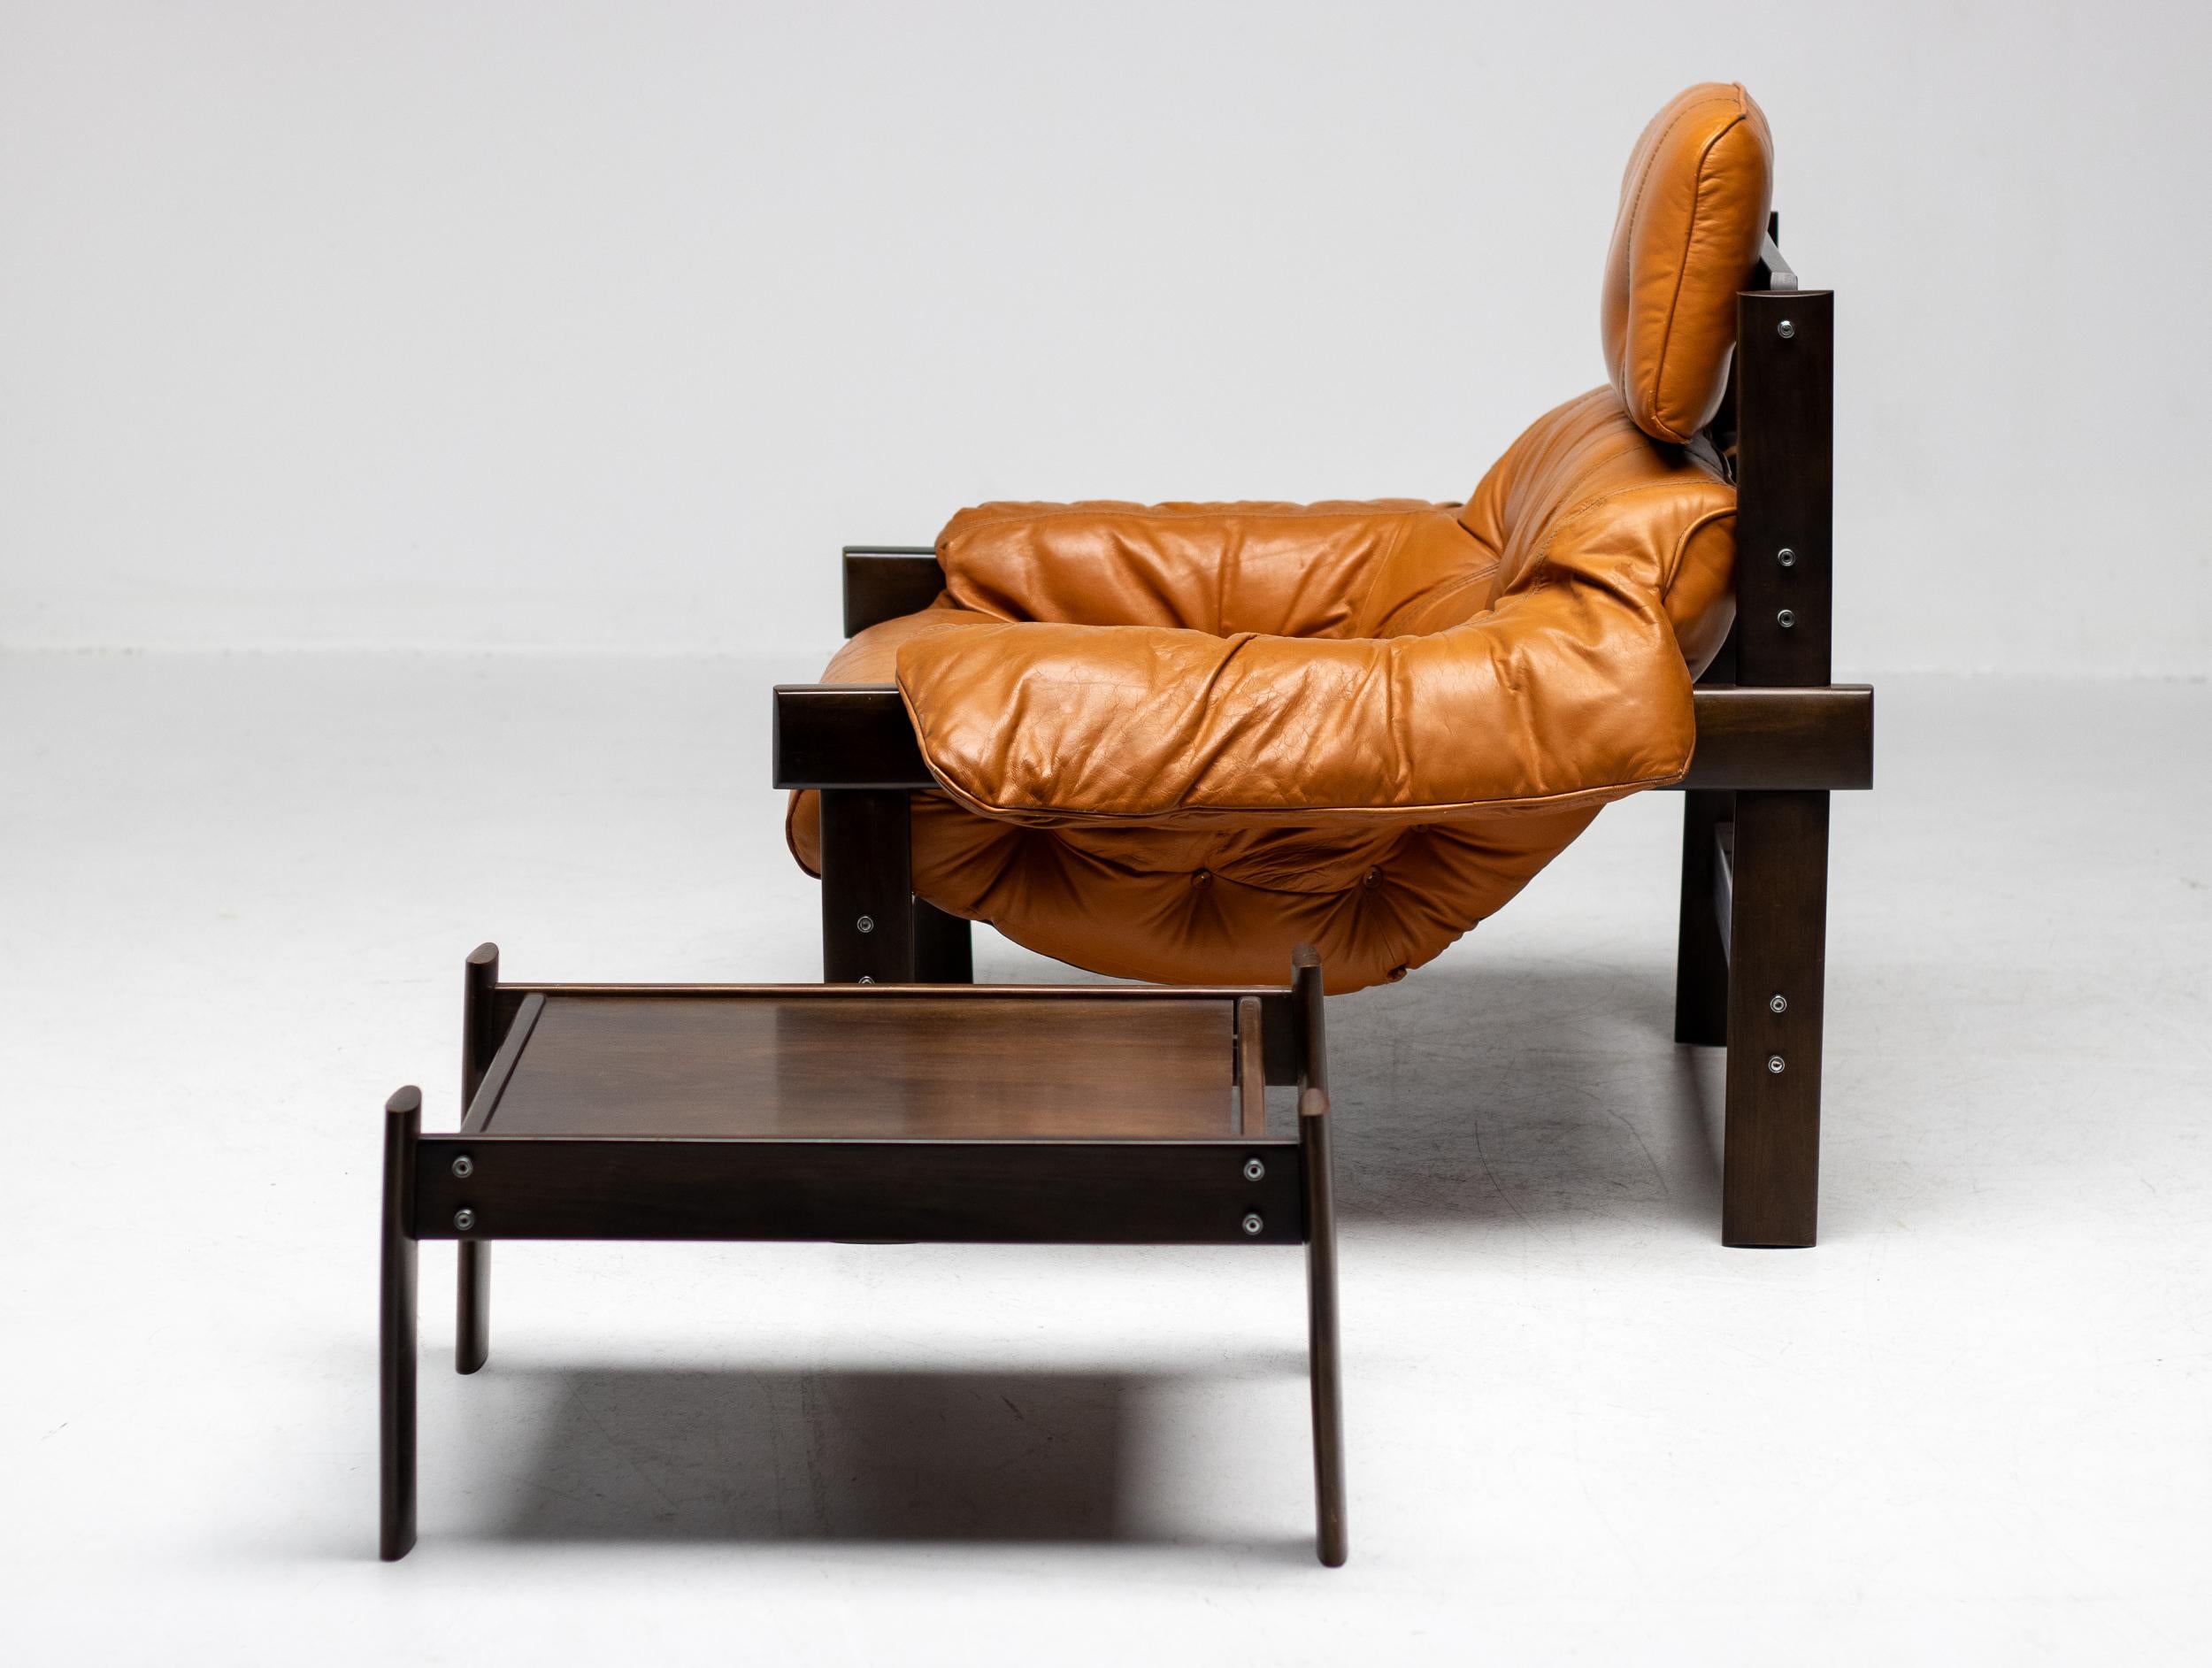 Percival Lafer MP-43 Lounge Chair Produced by Lafer MP in Brazil 1